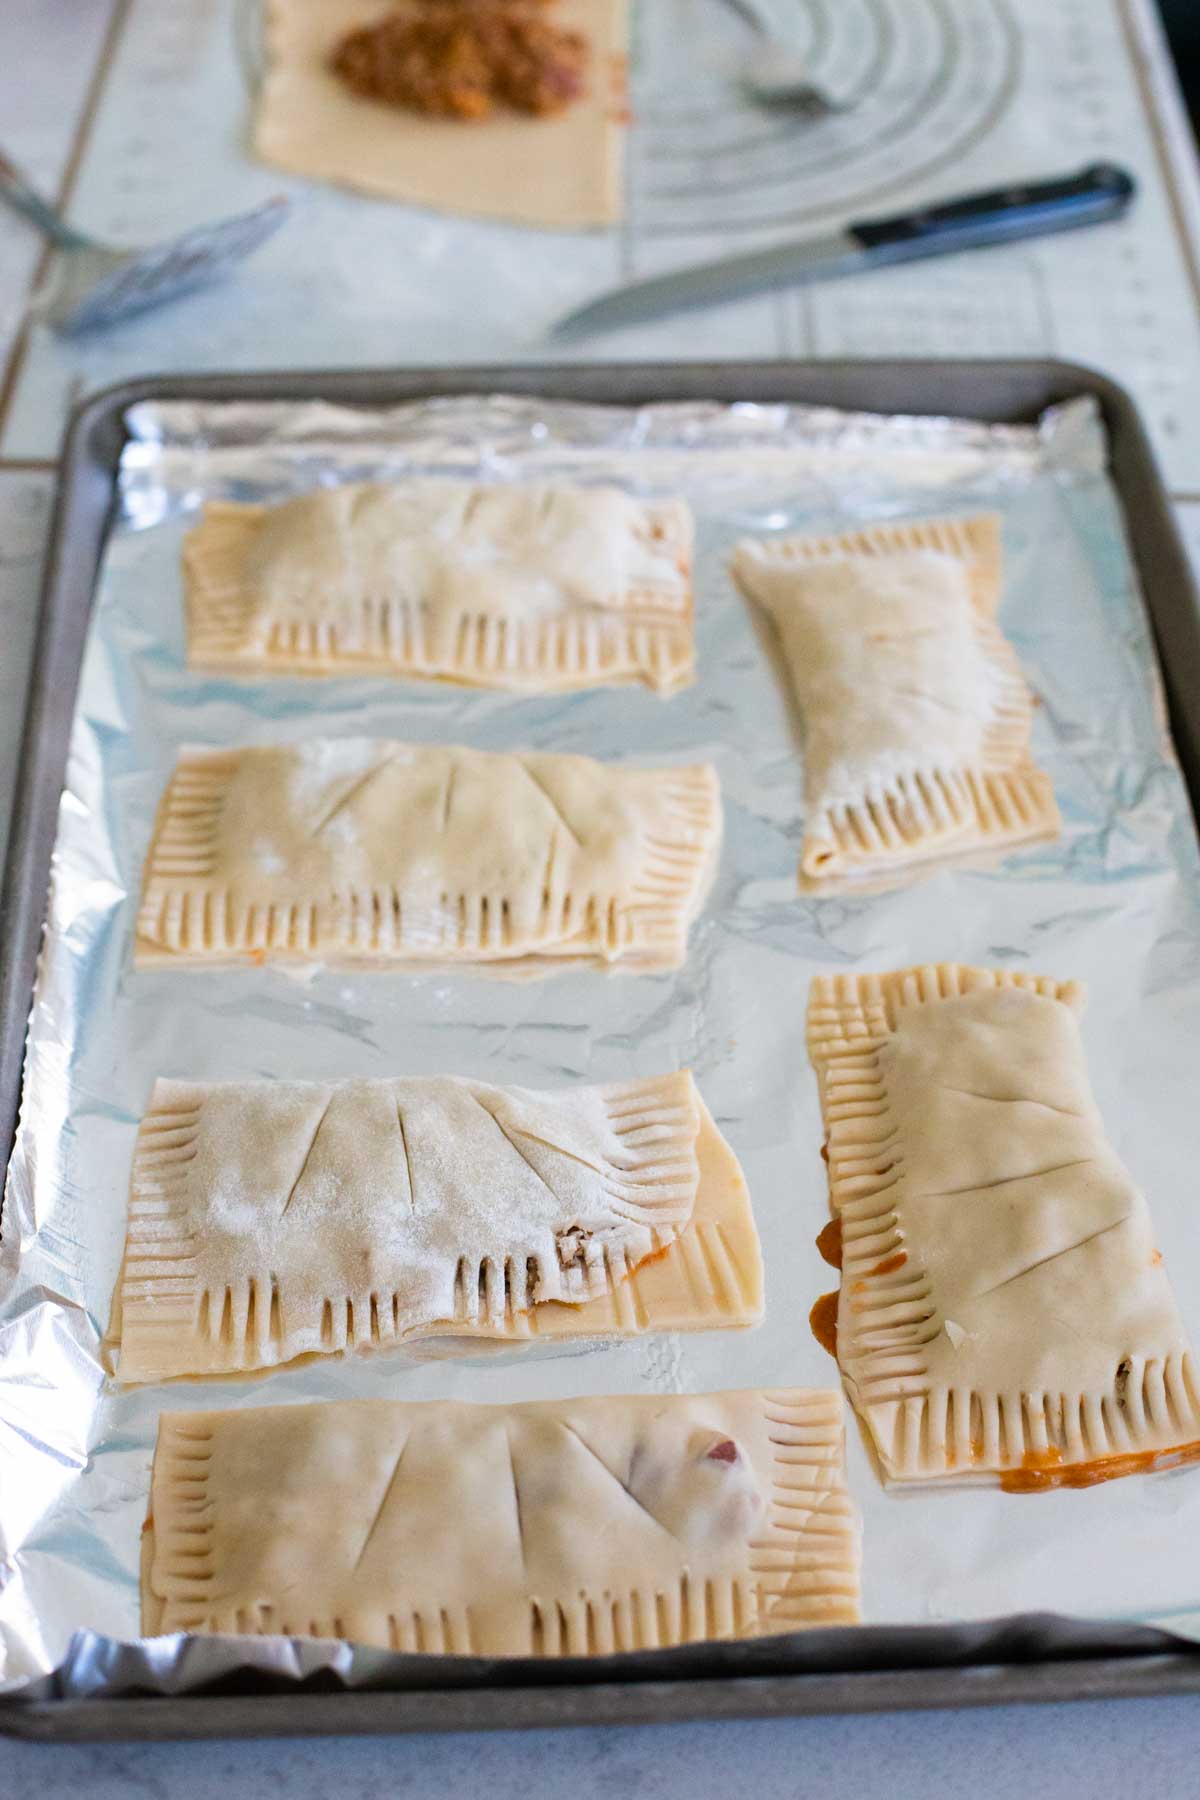 A baking sheet lined with foil has hand pies lined up for baking.